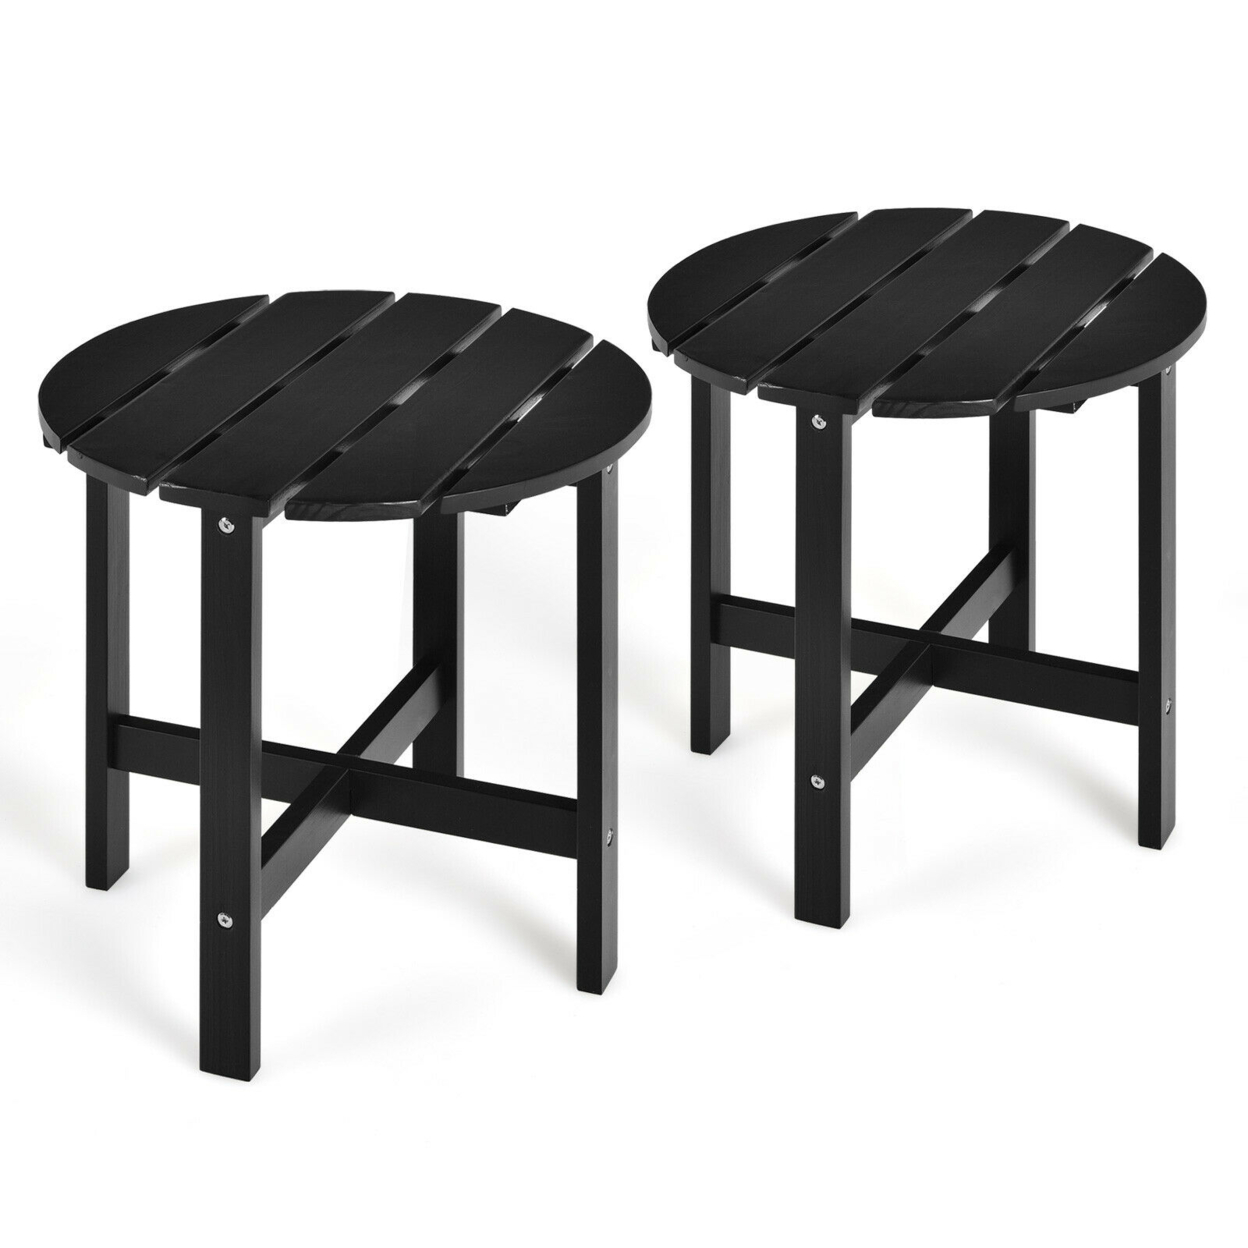 2 PCS 18'' Patio Round Side End Coffee Table Wooden Slat Deck - Black